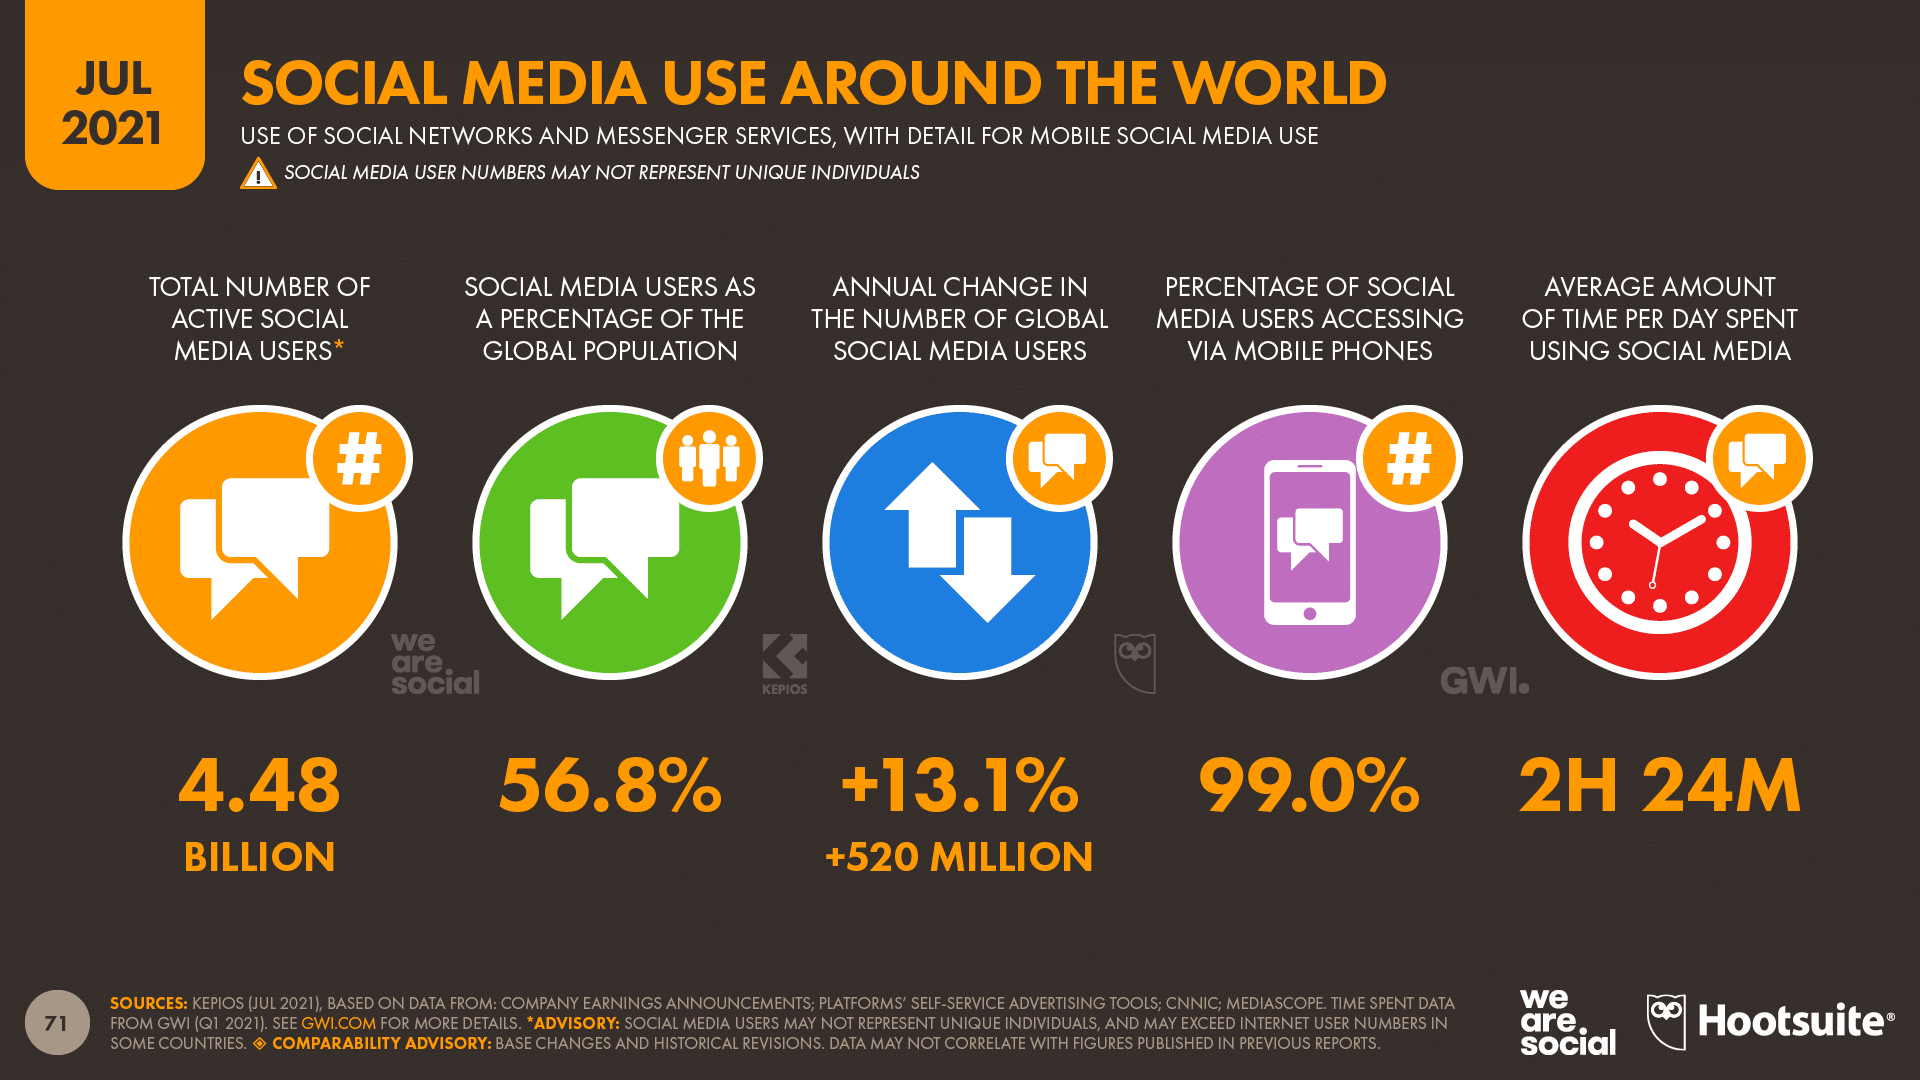 chart showing social media use around the world as of July 2021